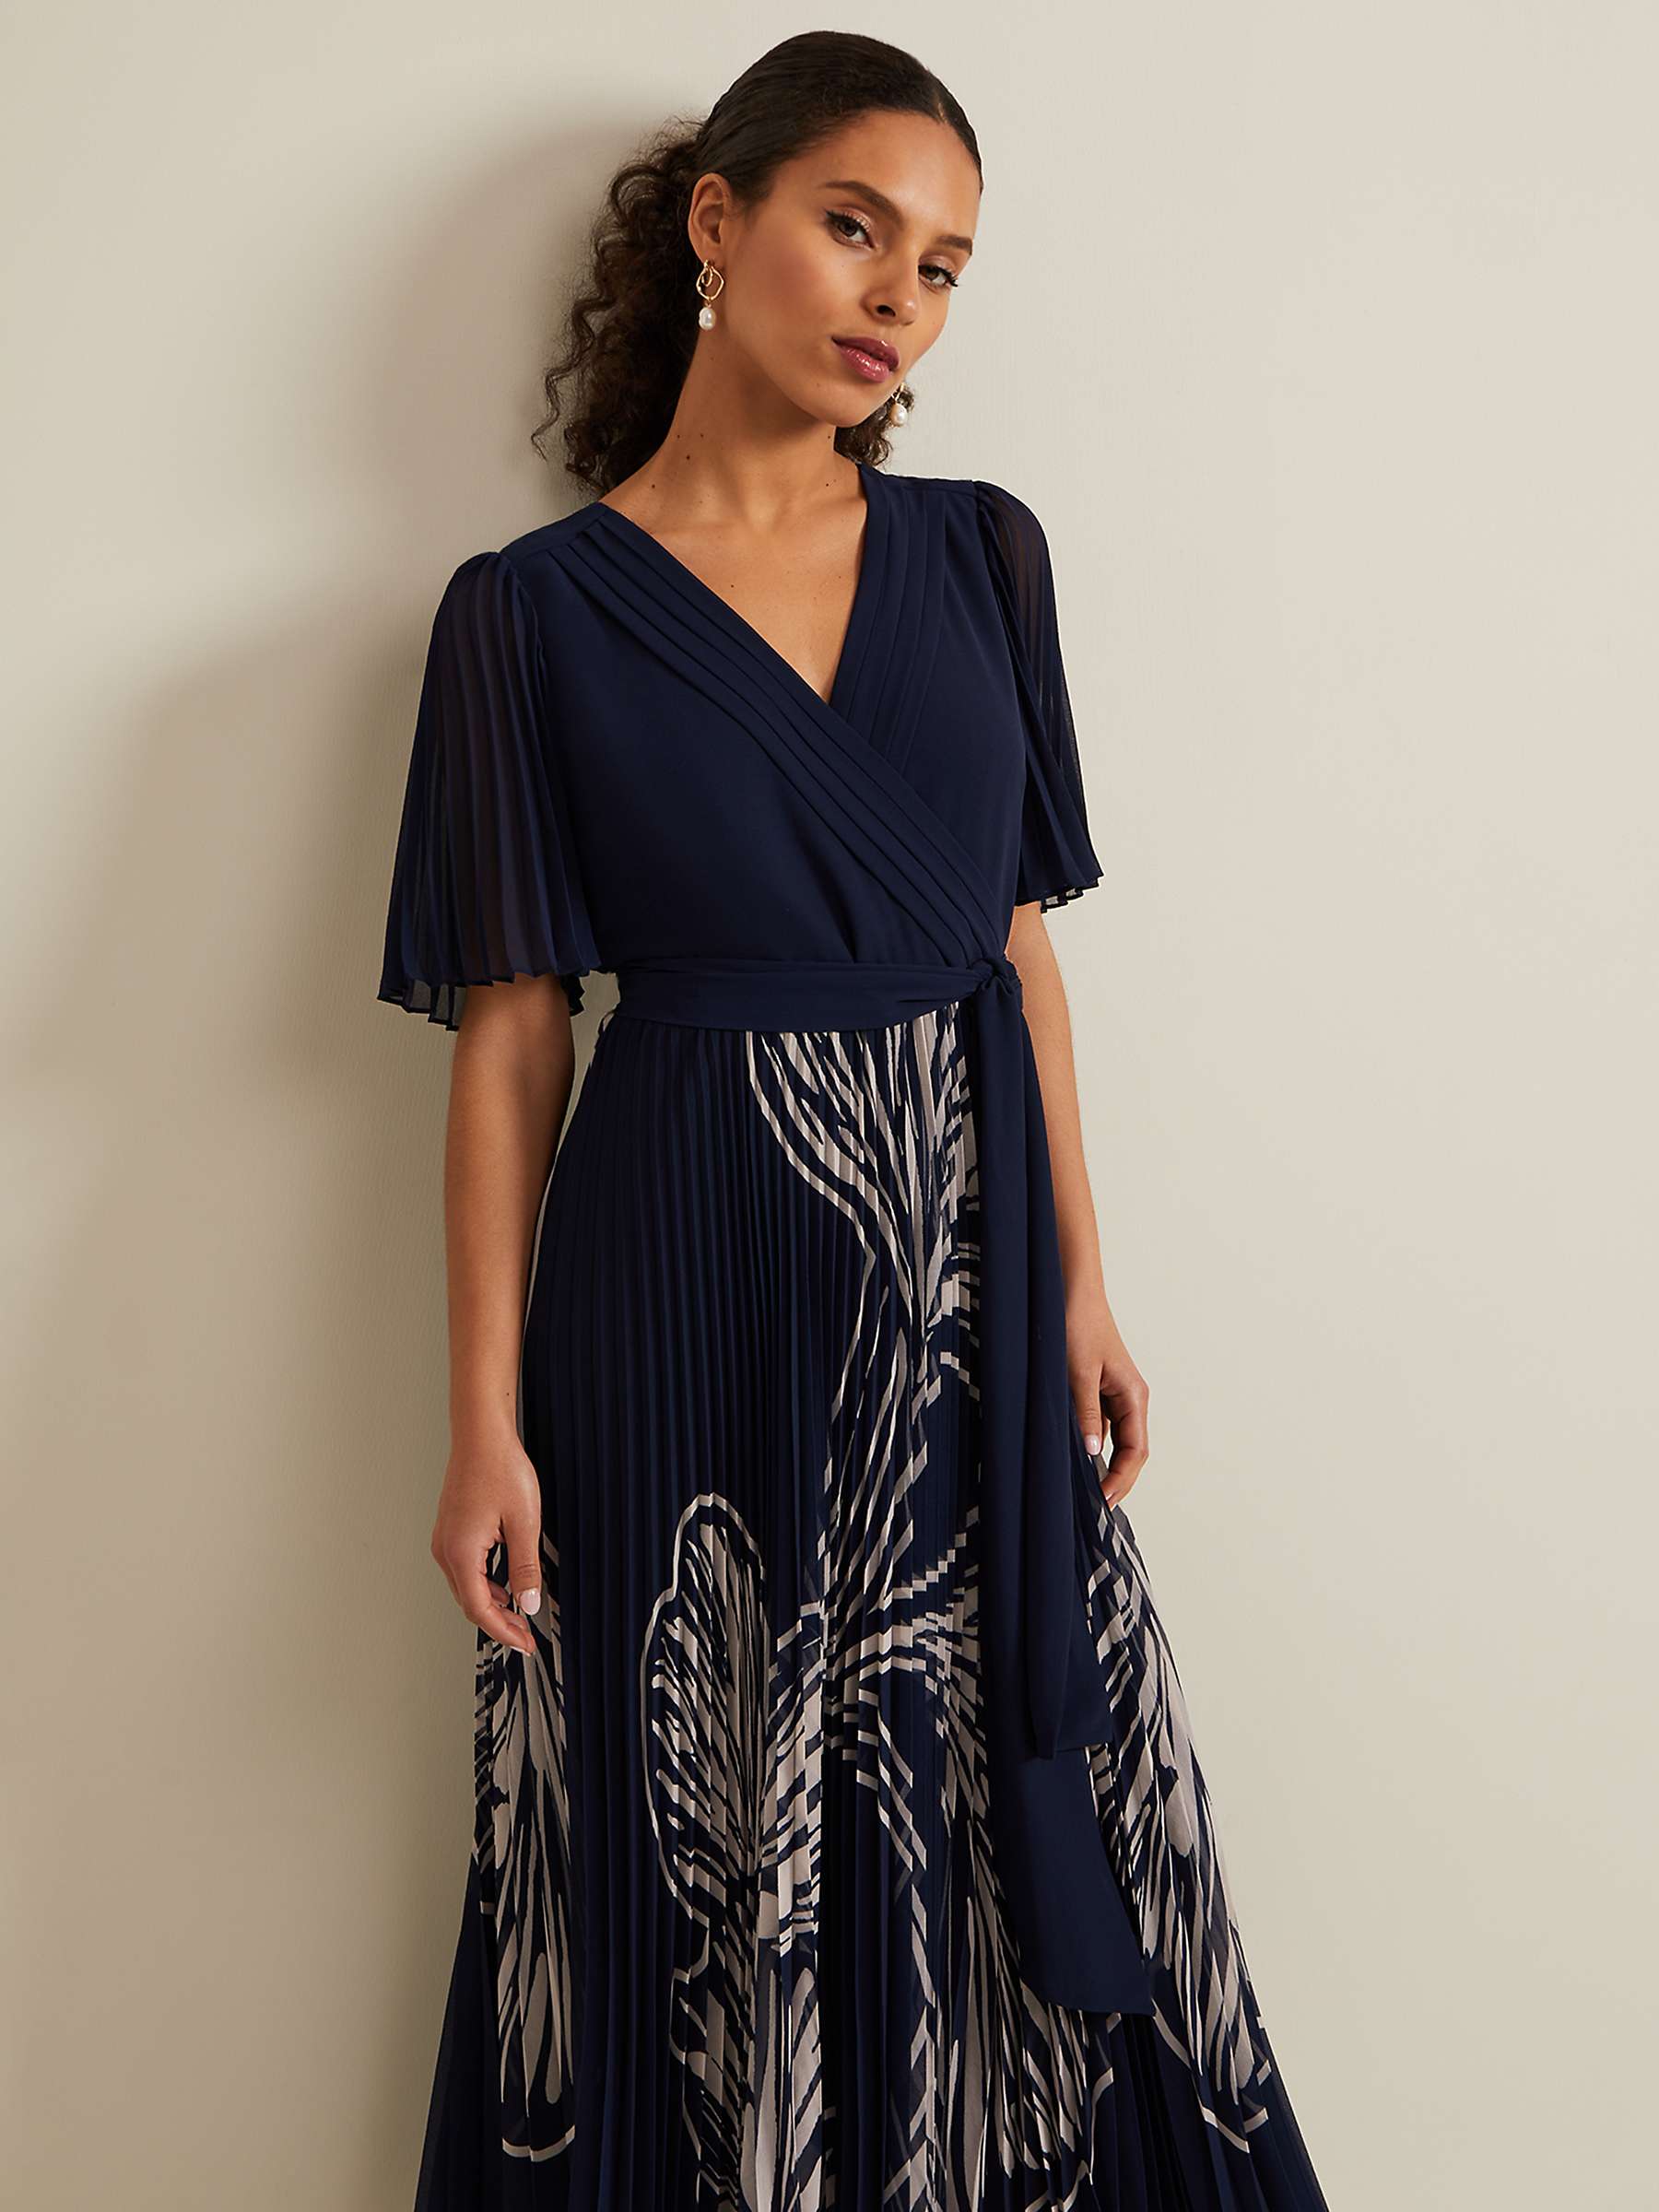 Buy Phase Eight Petite Abigail Print Pleated Midaxi Dress, Multi Online at johnlewis.com